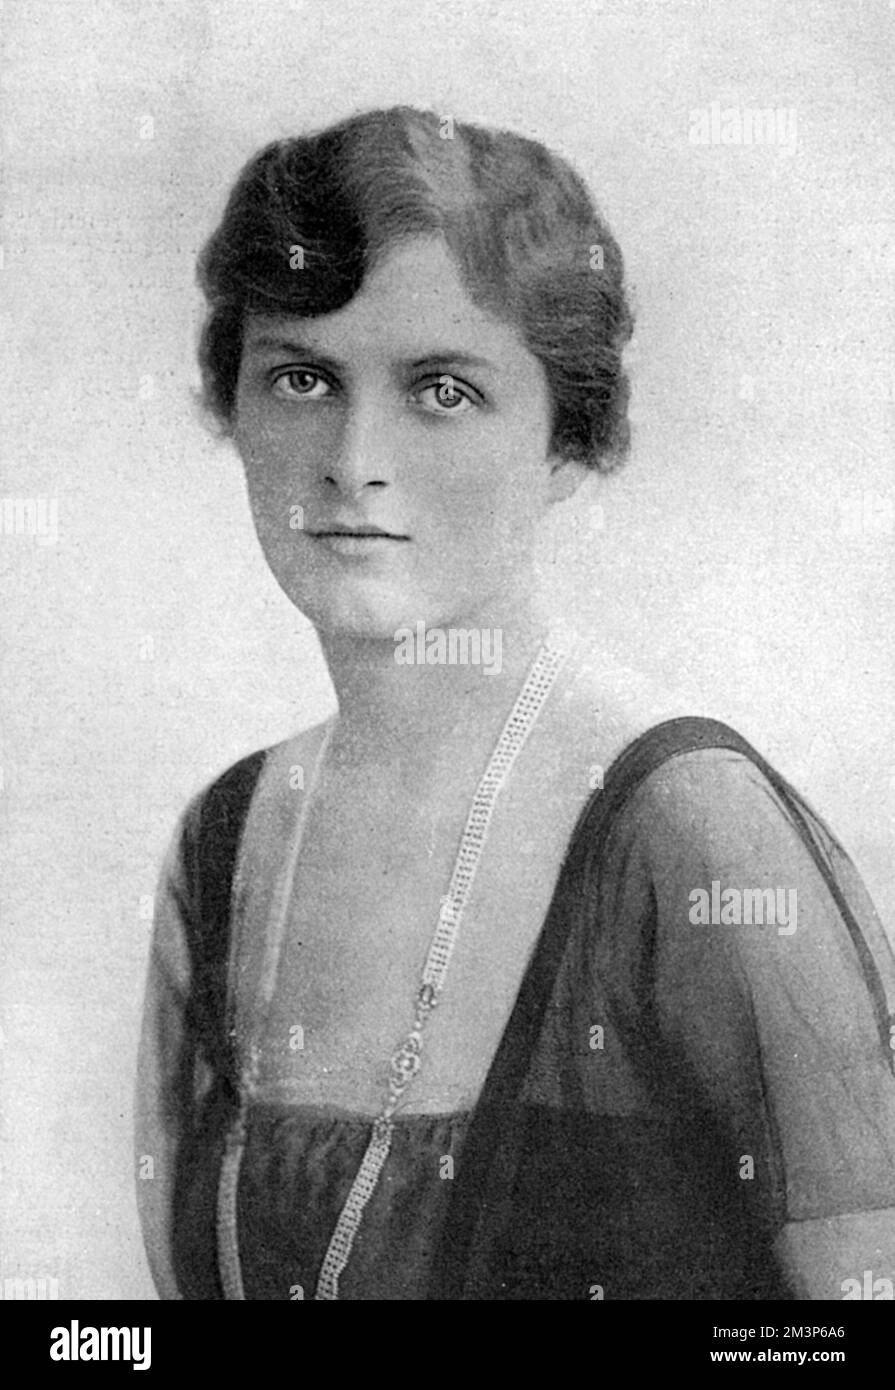 Lady Broughton (1894-1968), the first wife of Sir Jock Delves Broughton.  Previously Miss Vera Griffith-Boscawen, she married Jock in 1913 and divorced him in 1940 (he would go on to marry Diana Caldwell and stand trial for the murder of her lover, Josslyn Hay, Earl of Erroll in Kenya). Vera travelled widely in South East Asia and was known as a big game hunter and fisherwoman. She was also a highly regarded photographer of natural subjects.      Date: 1916 Stock Photo